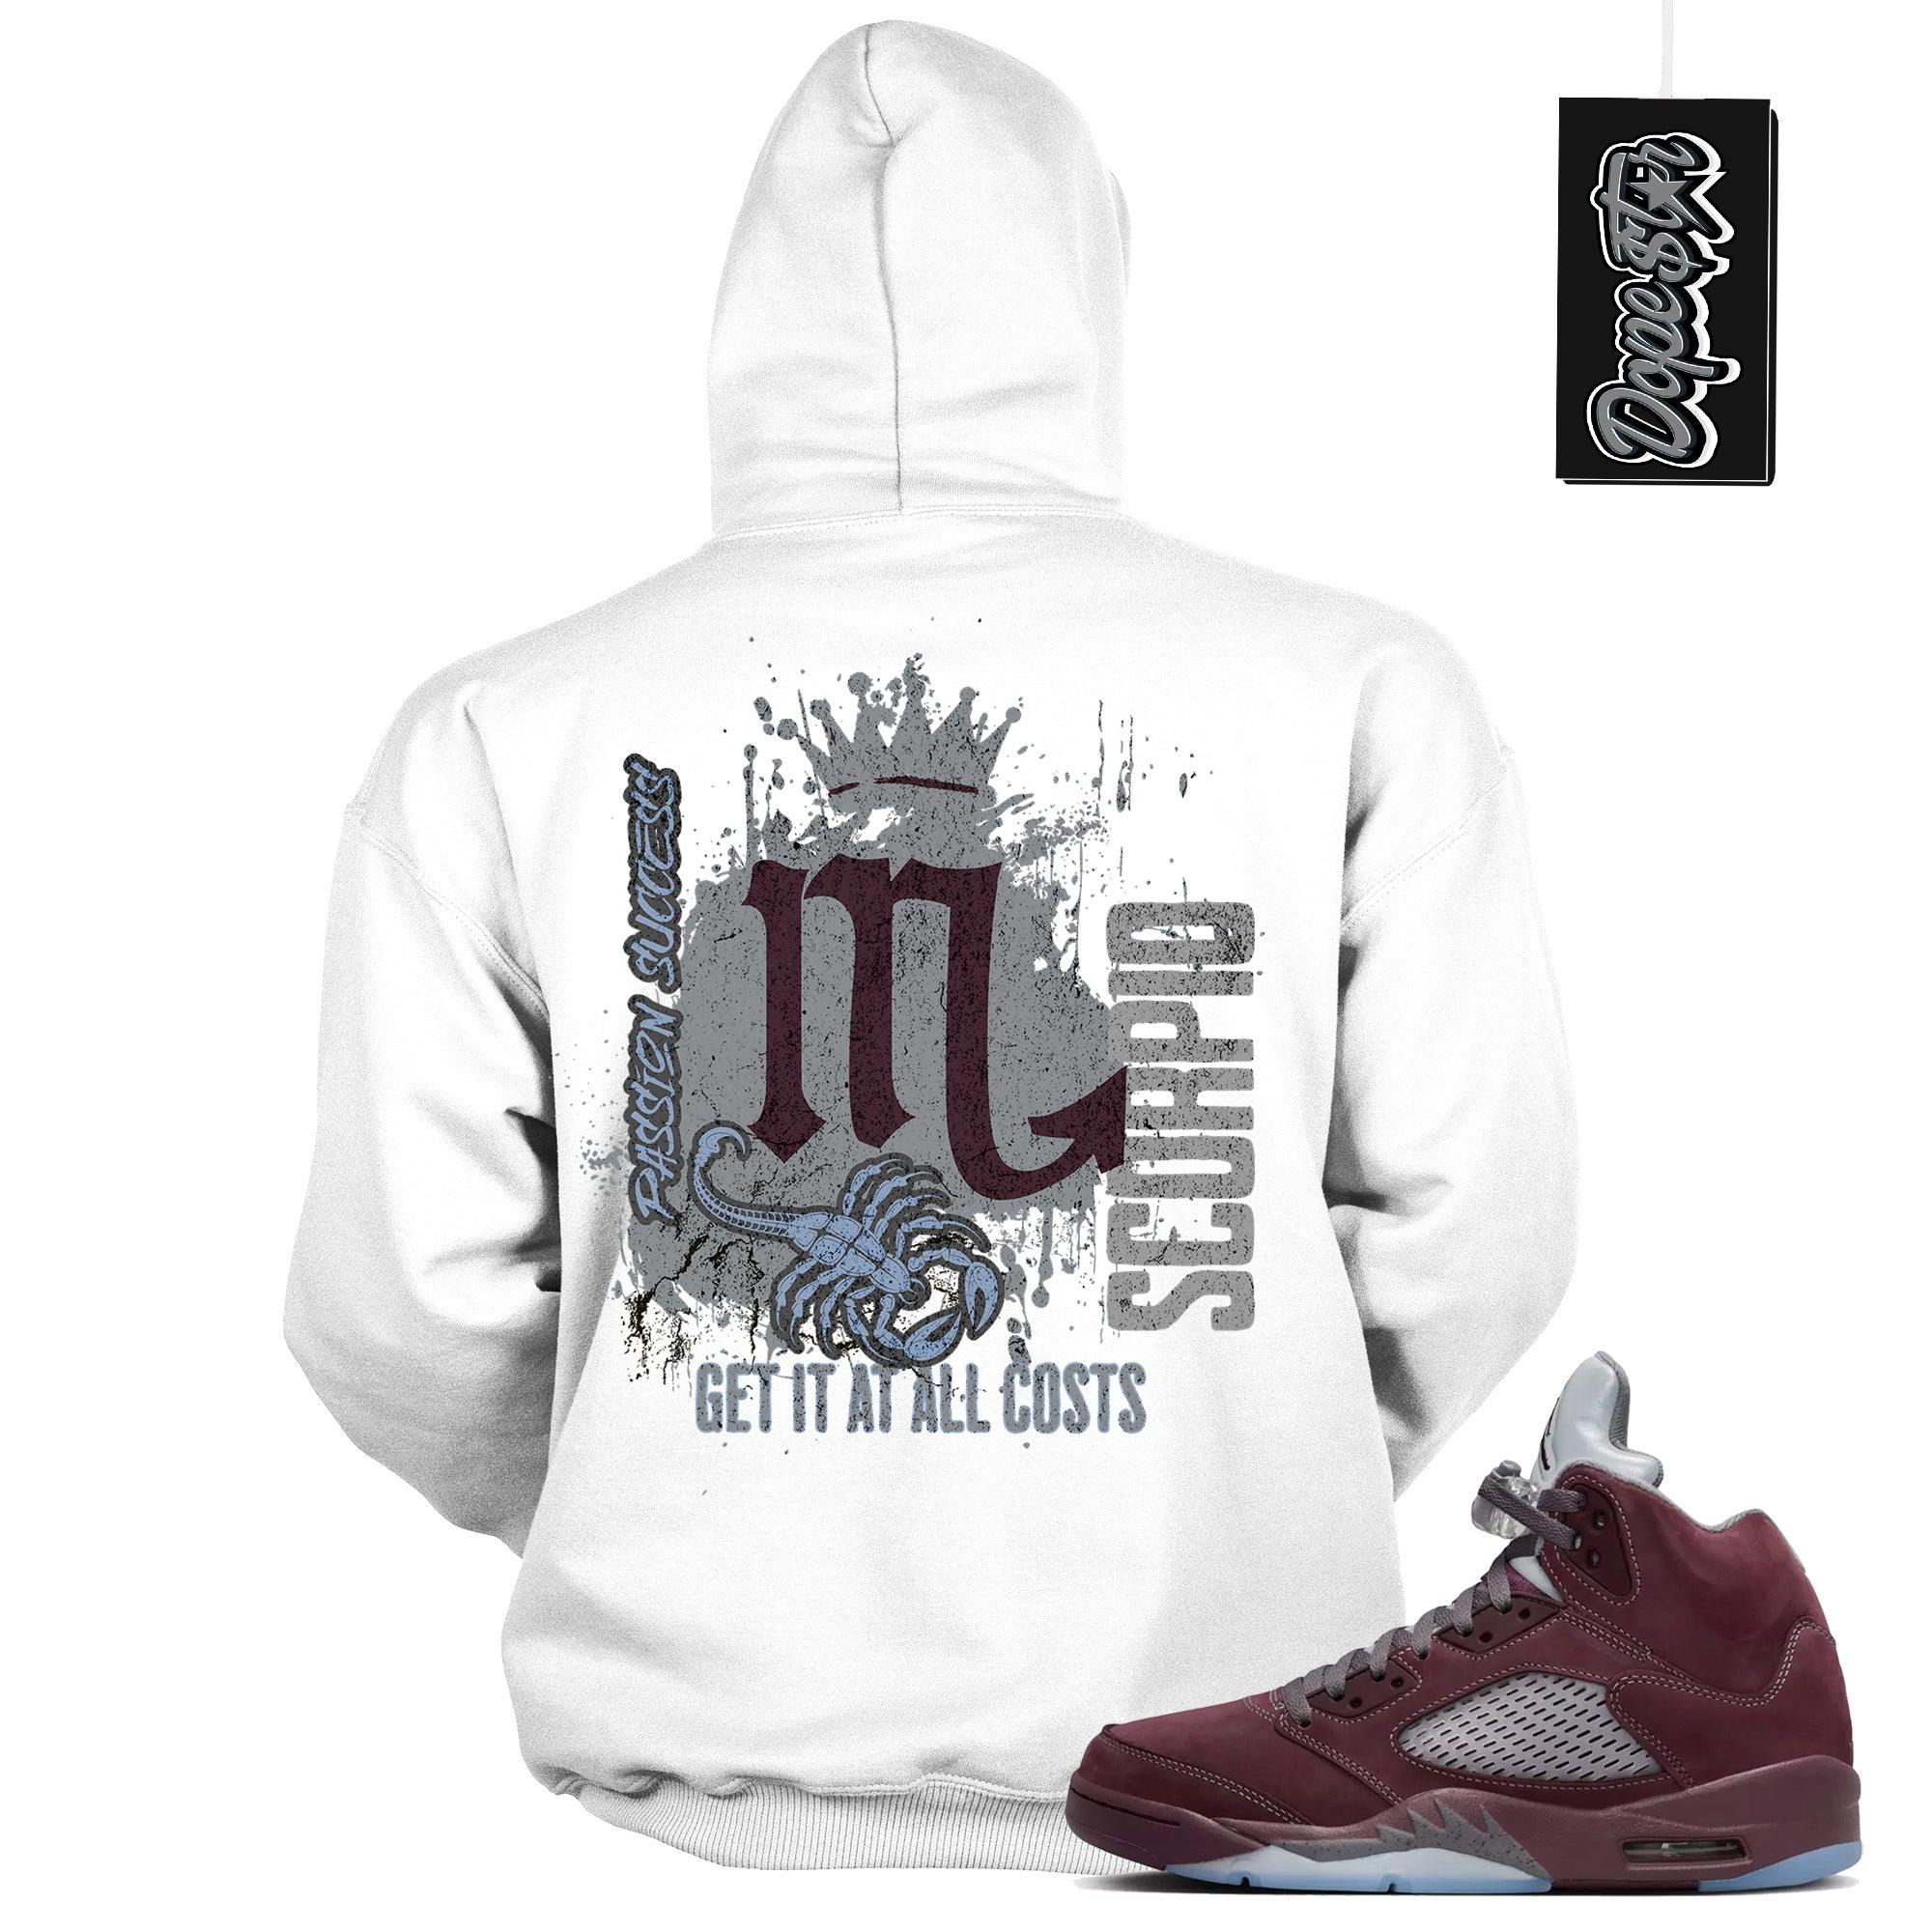 Cool White Graphic Hoodie with “ Scorpio “ print, that perfectly matches Air Jordan 5 Burgundy 2023 sneakers